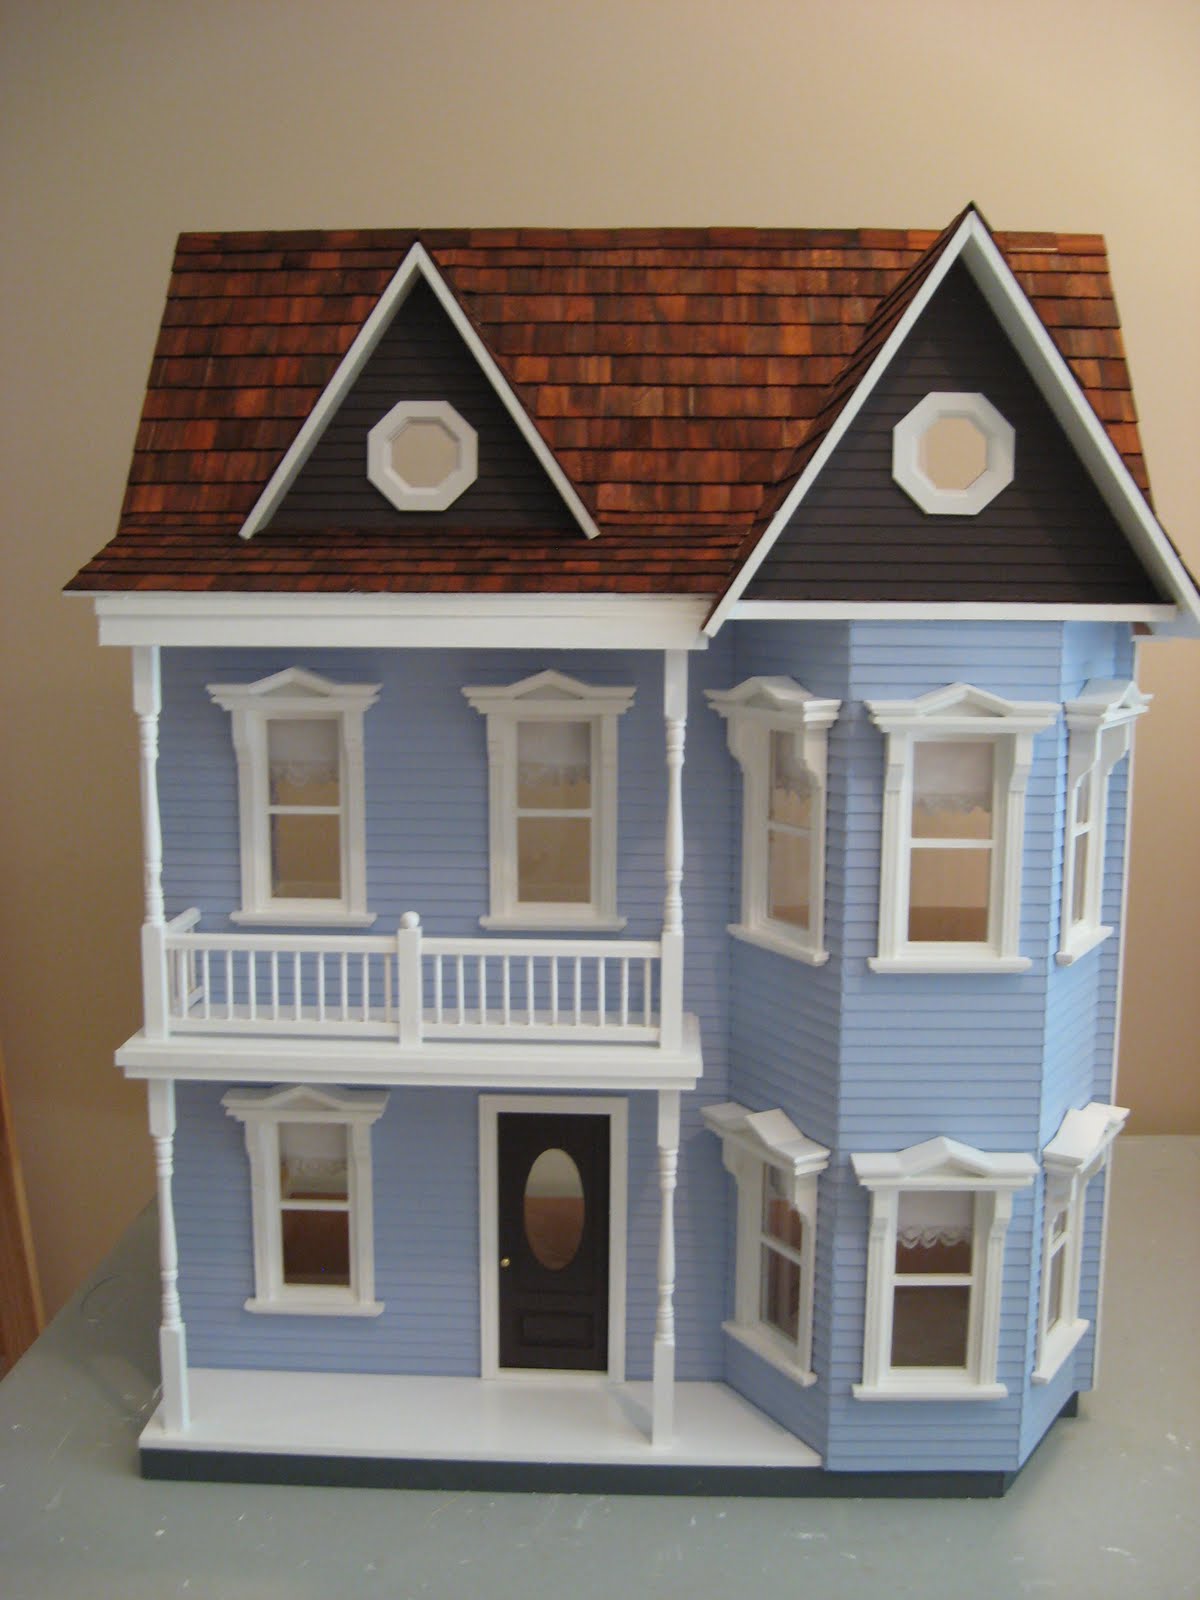 Little Darlings Dollhouses Completed Finished and ON 